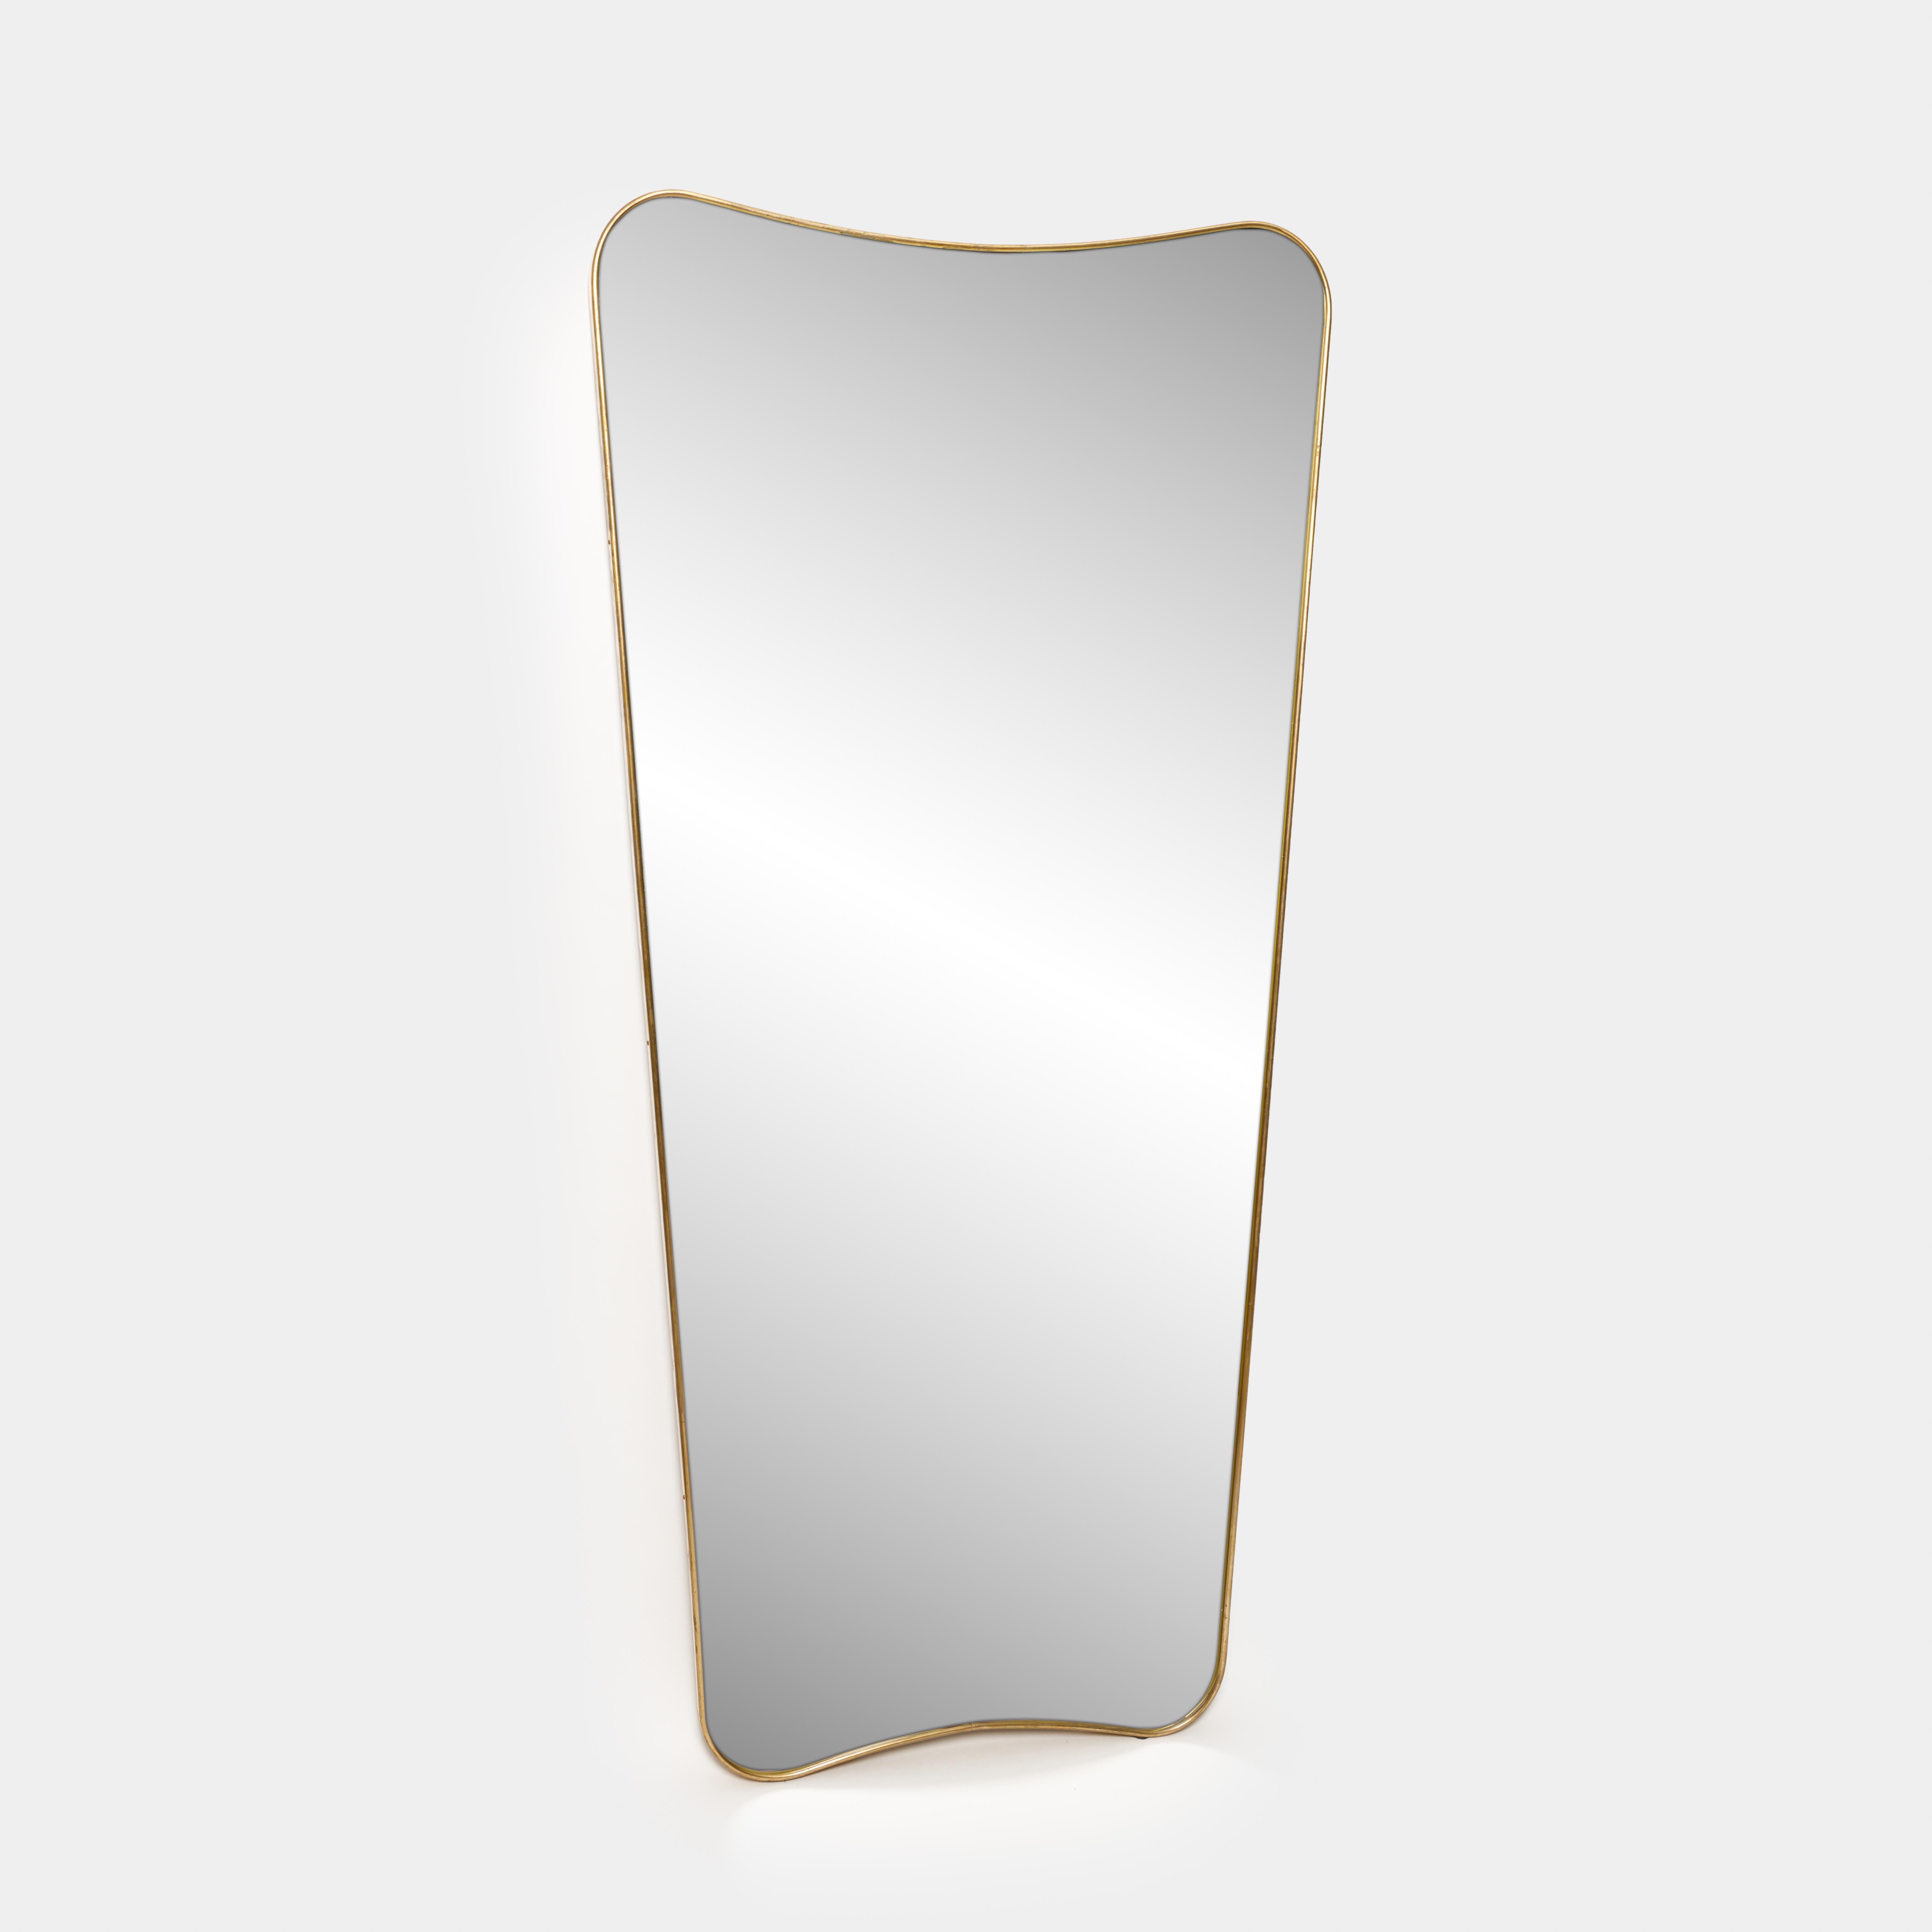 Pair of elegant and large brass framed mirror with gently curved form.  Beautifully patinated brass frame and solid construction with wood backing.  

Sold individually or as a pair and price is for the pair.